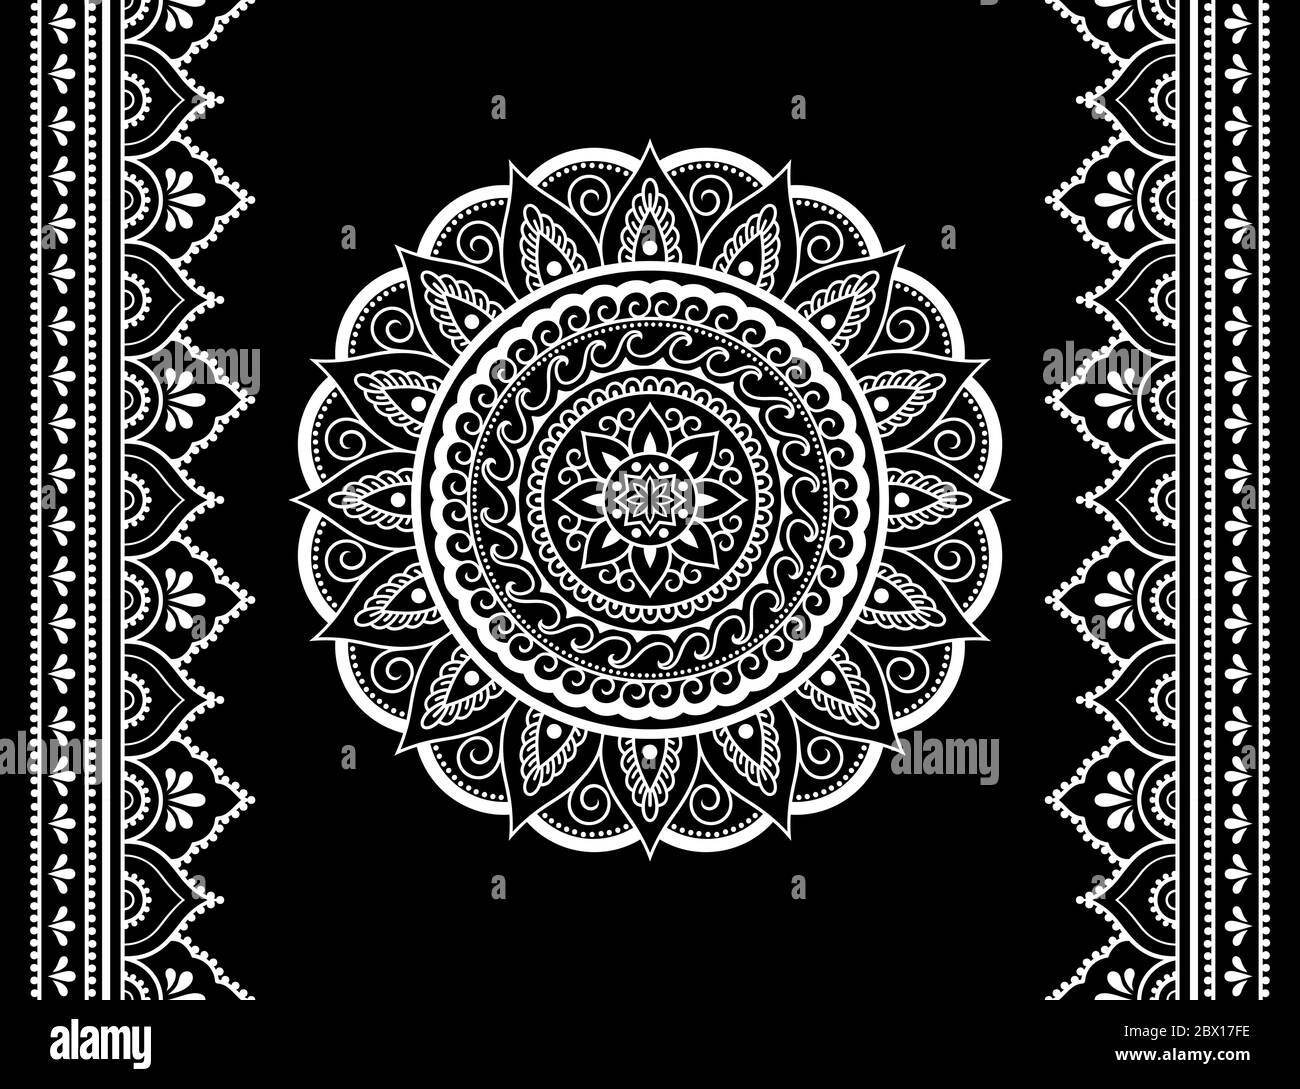 Detailed Drawings with many Styles  Doodle art, Detailed drawings, Mandala  design art